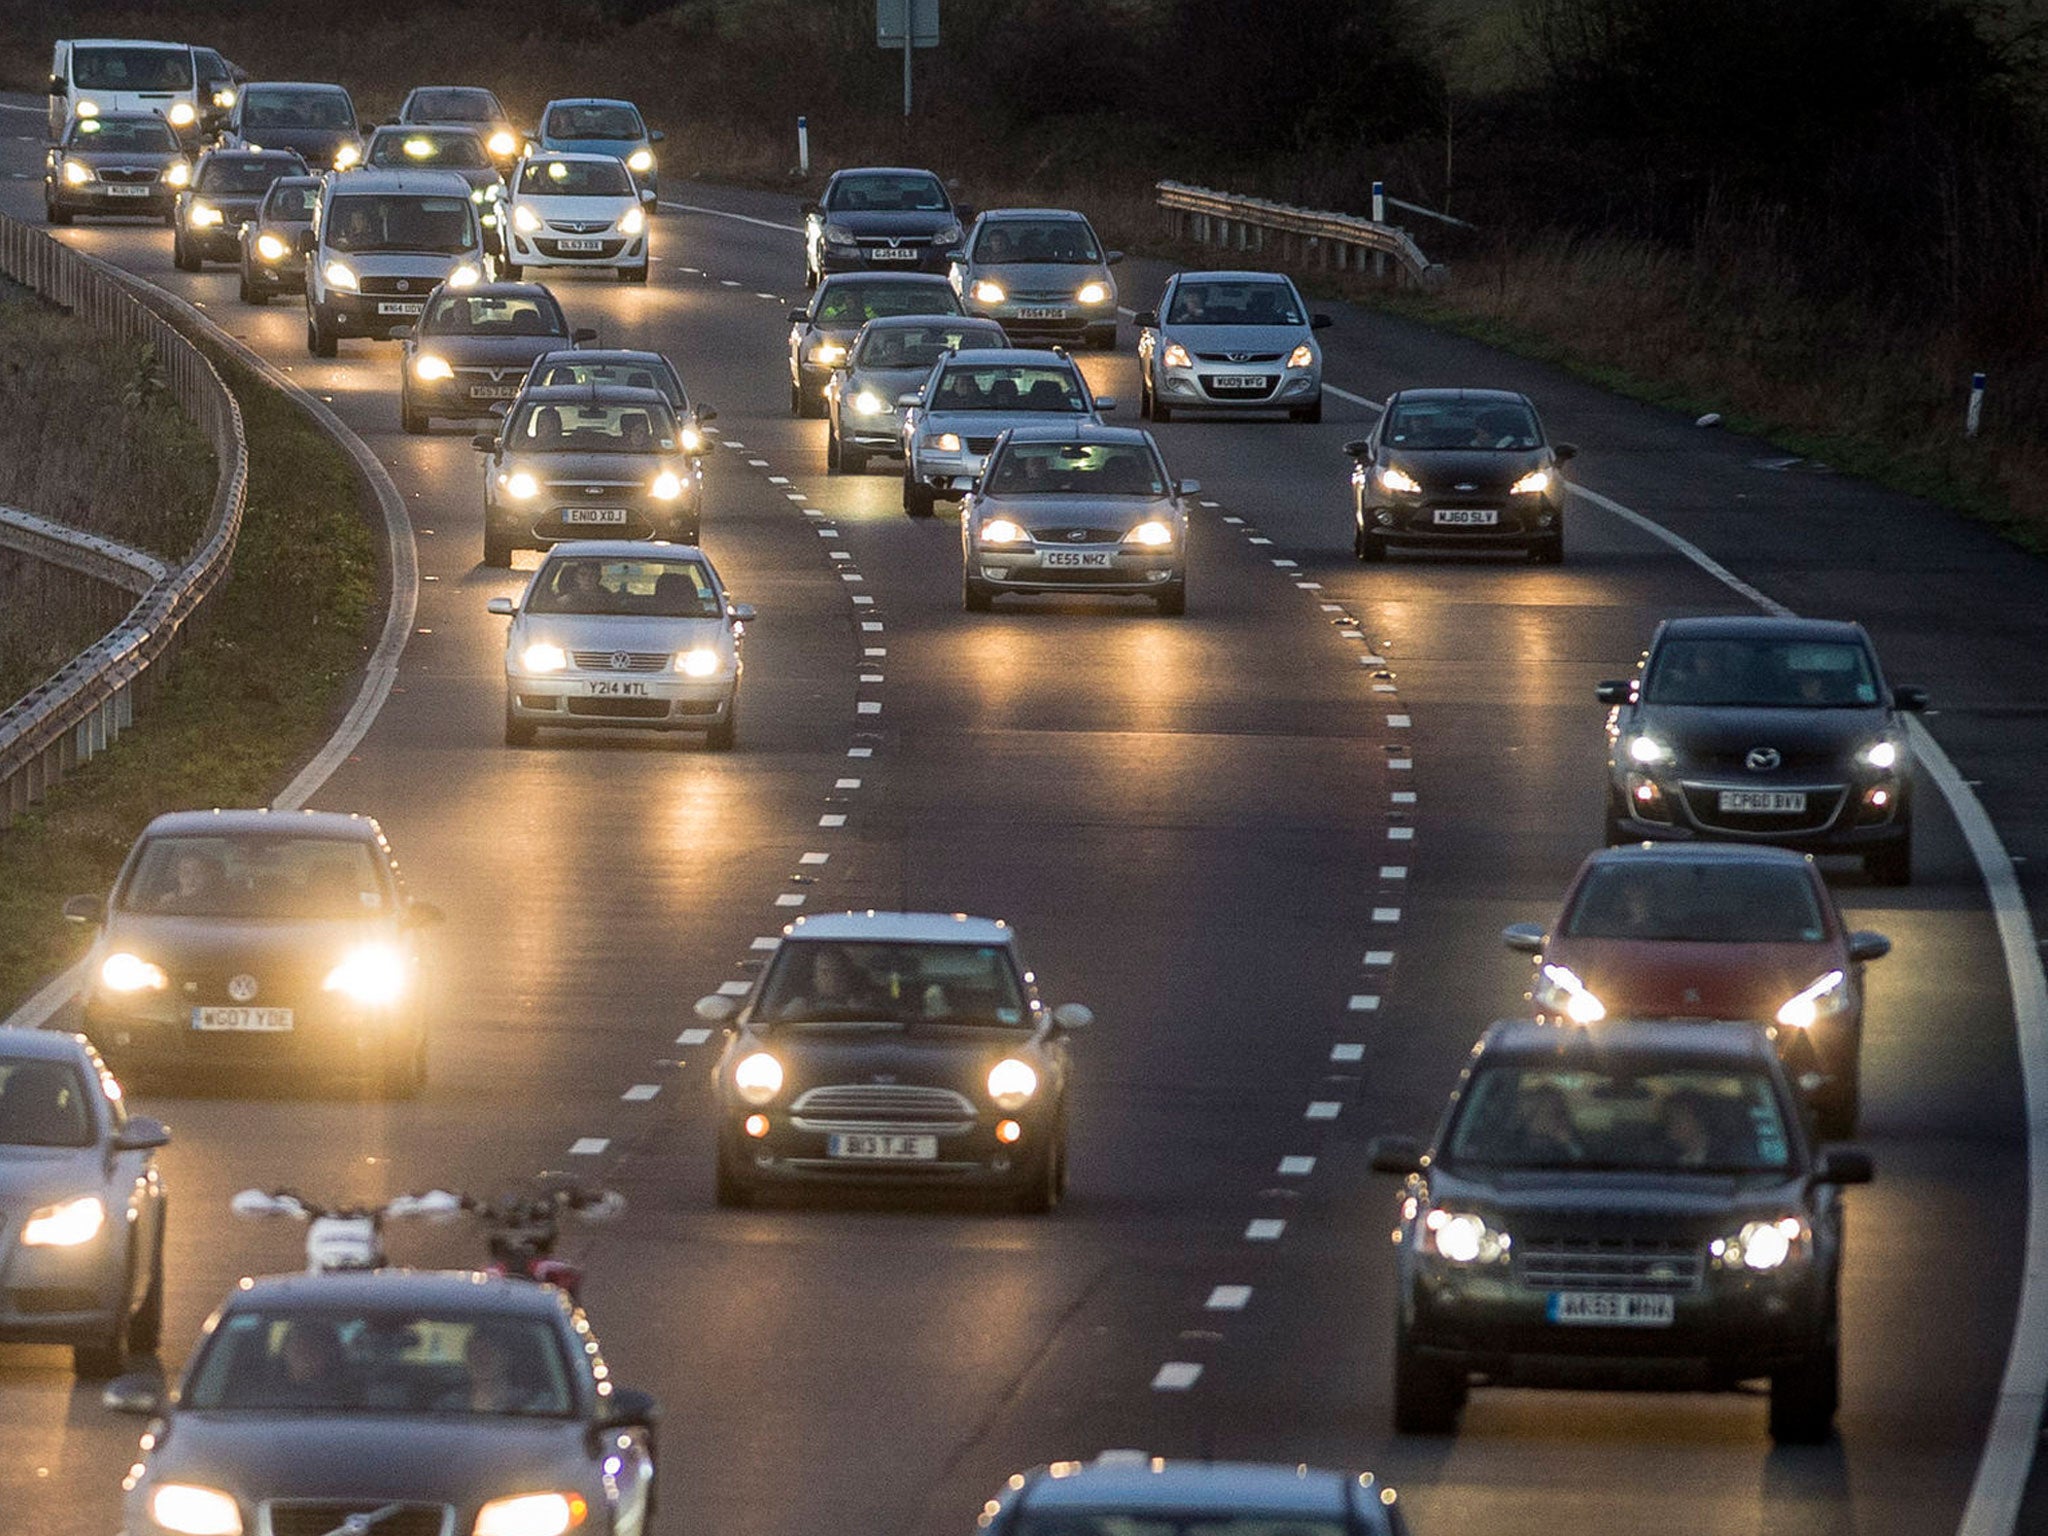 The poll of 2,000 drivers found one quarter are embarrassed by the cleanliness of their car